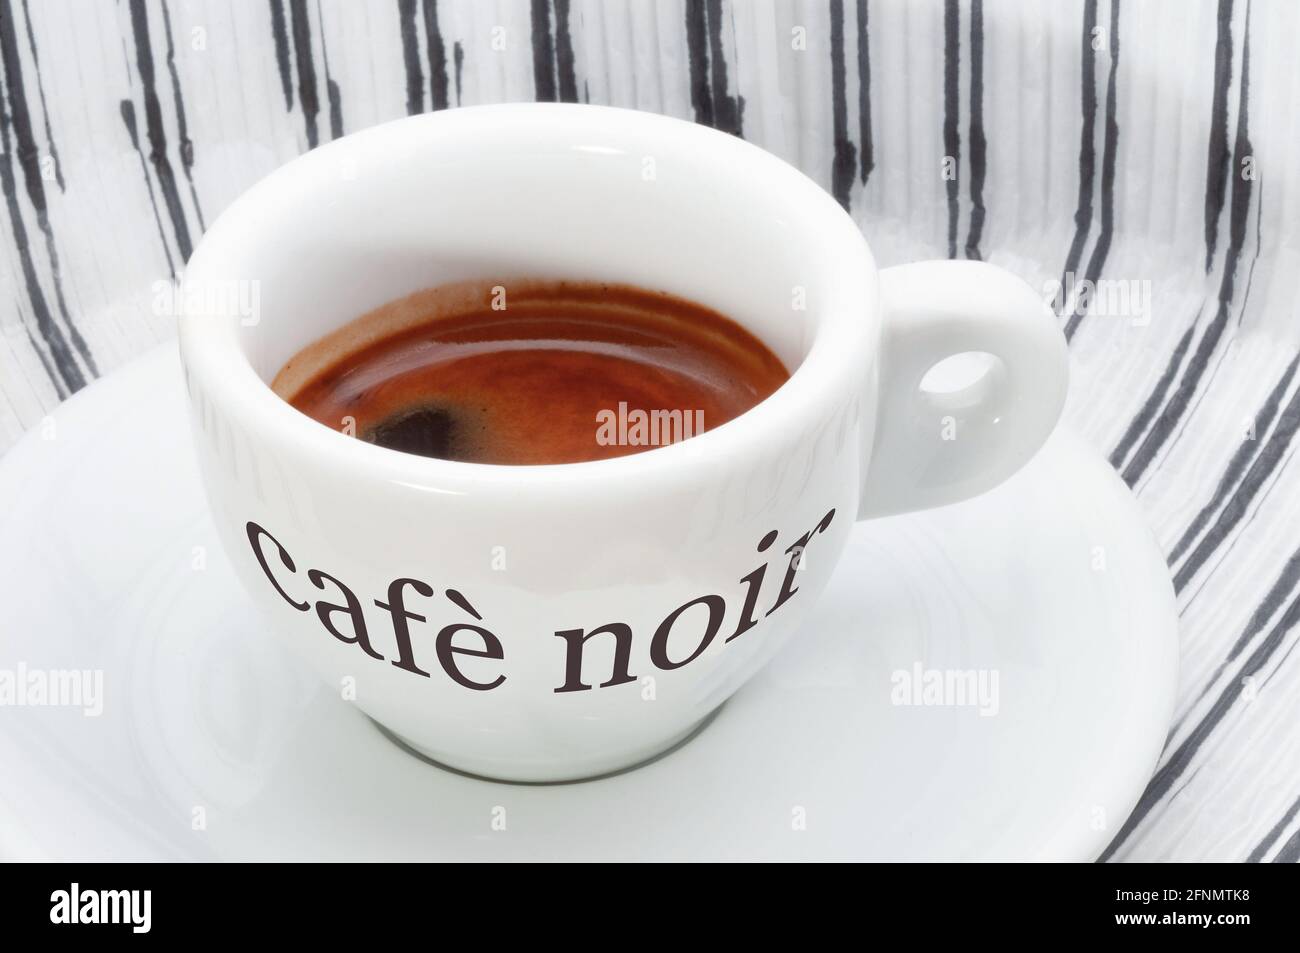 Cafè noir logo on a coffee cup with striped background Stock Photo - Alamy